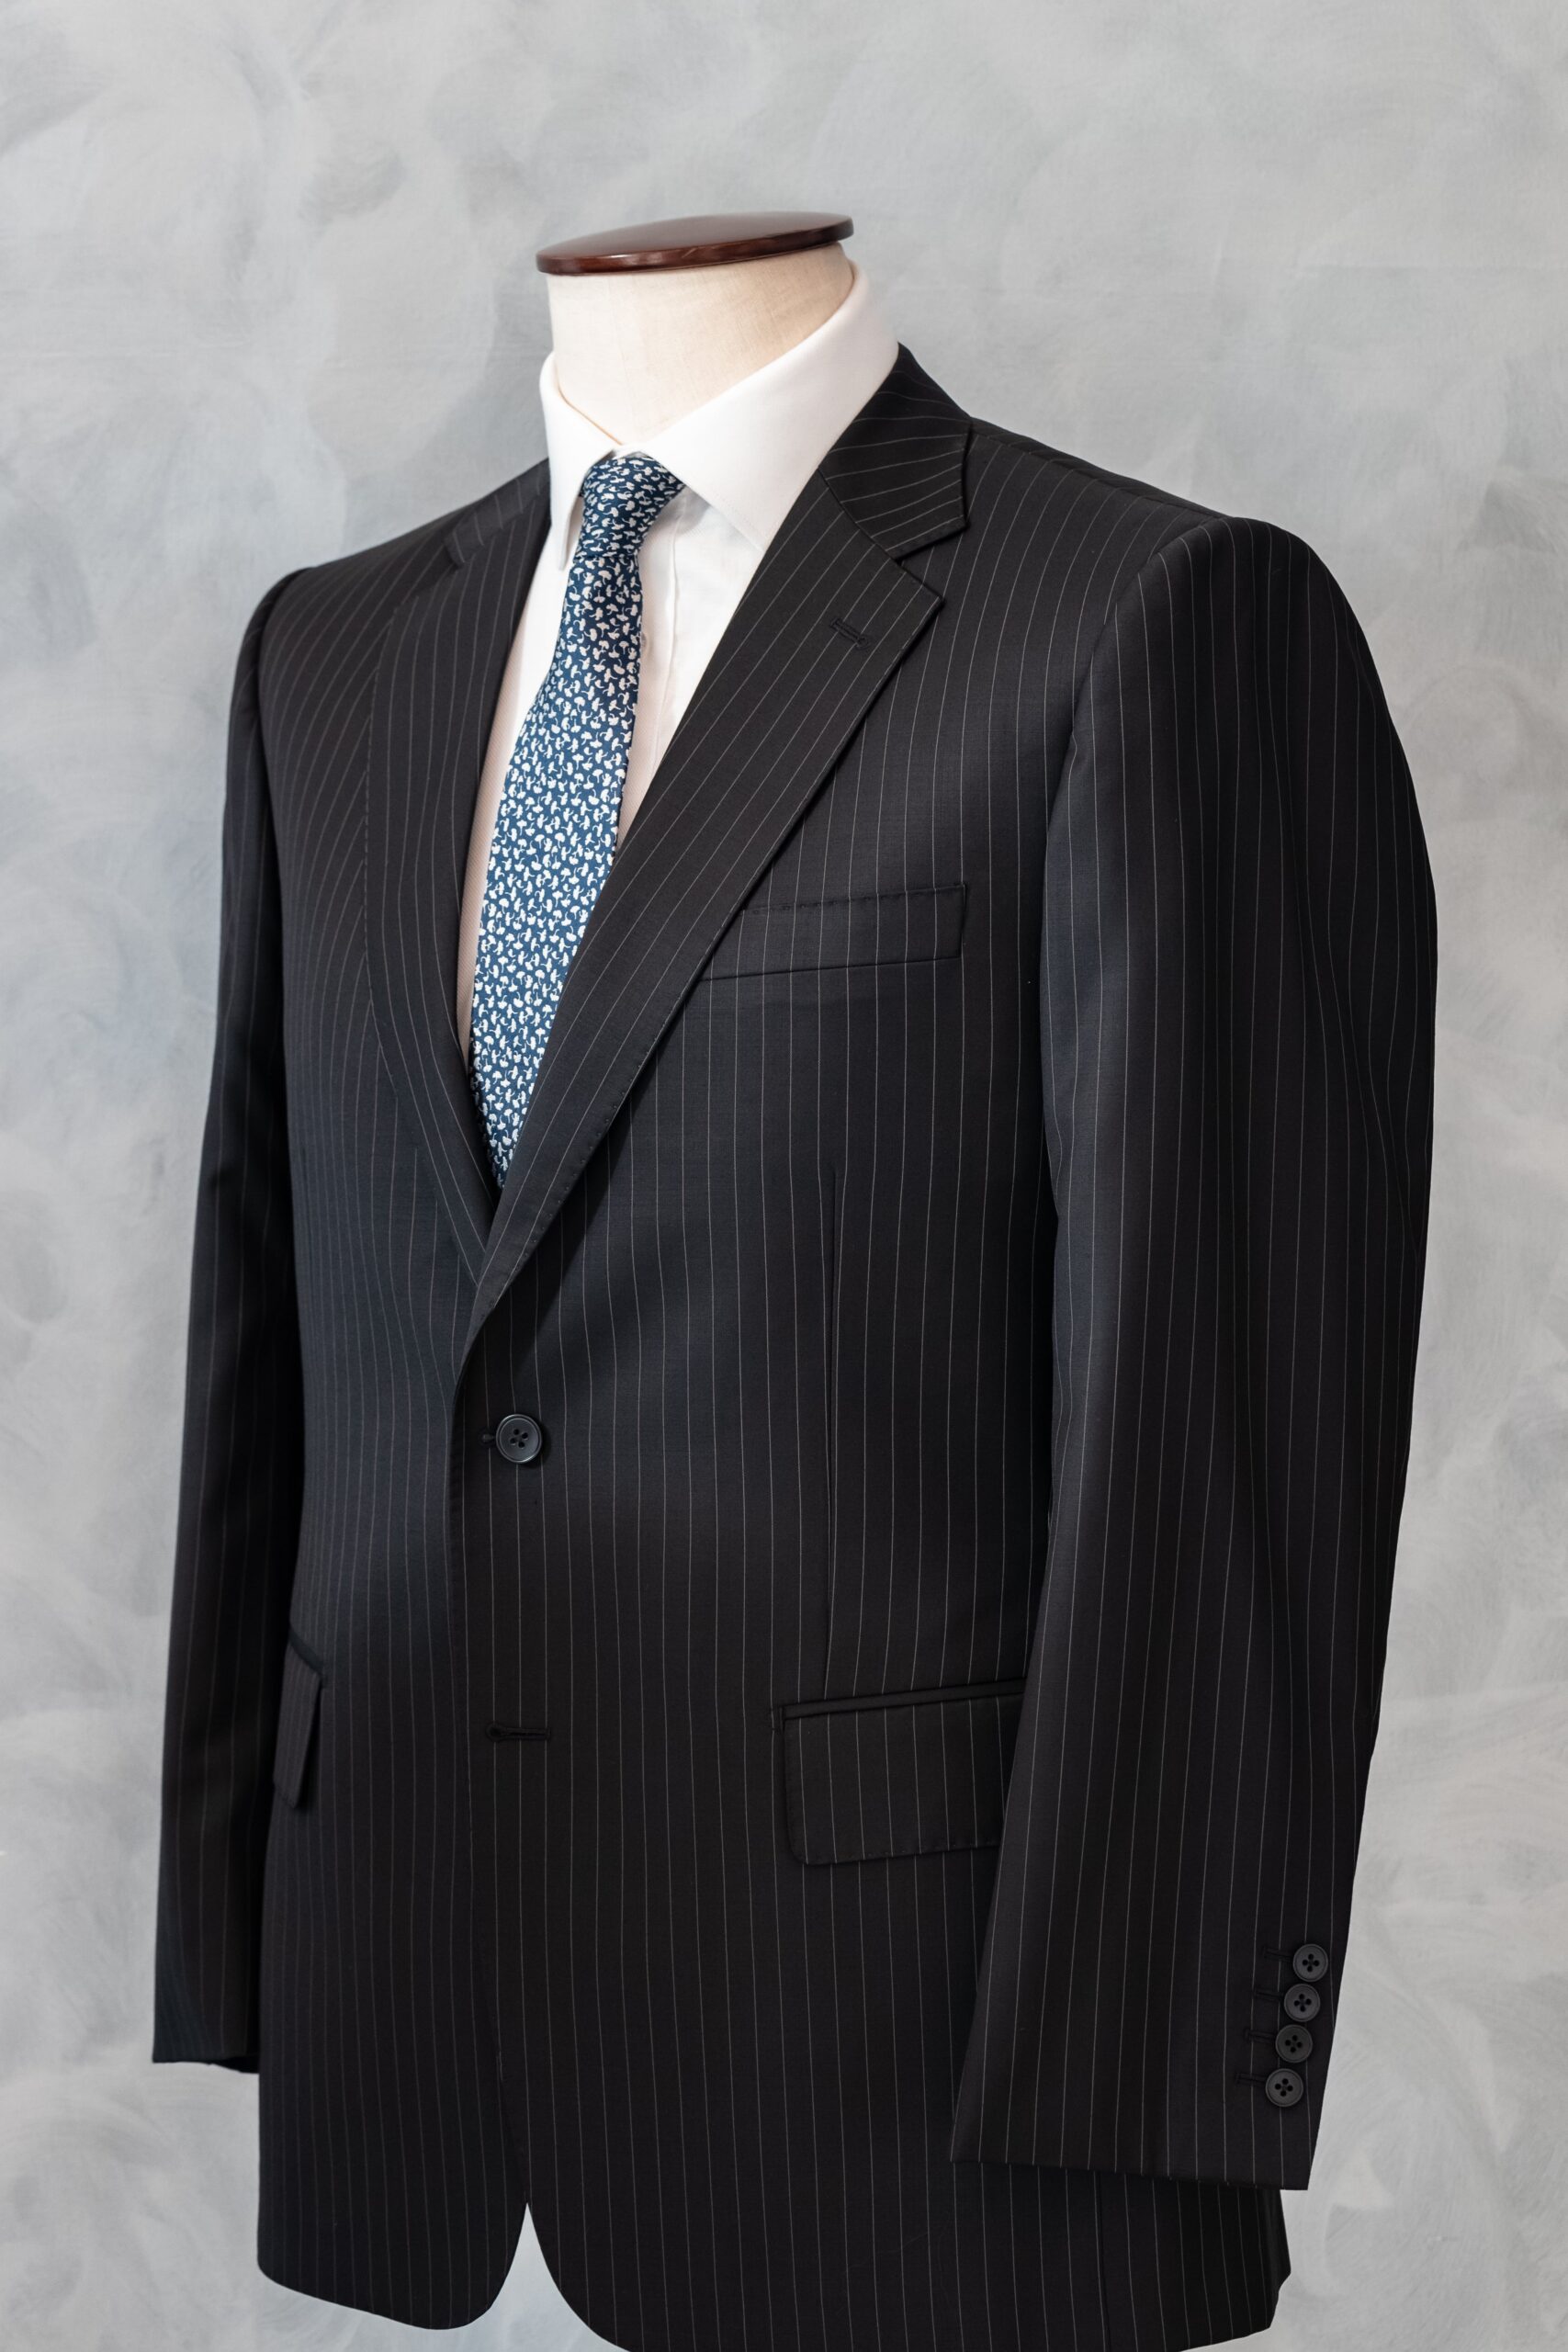 suits makers | WE STITCH THE SUITS THAT SUITS YOU!